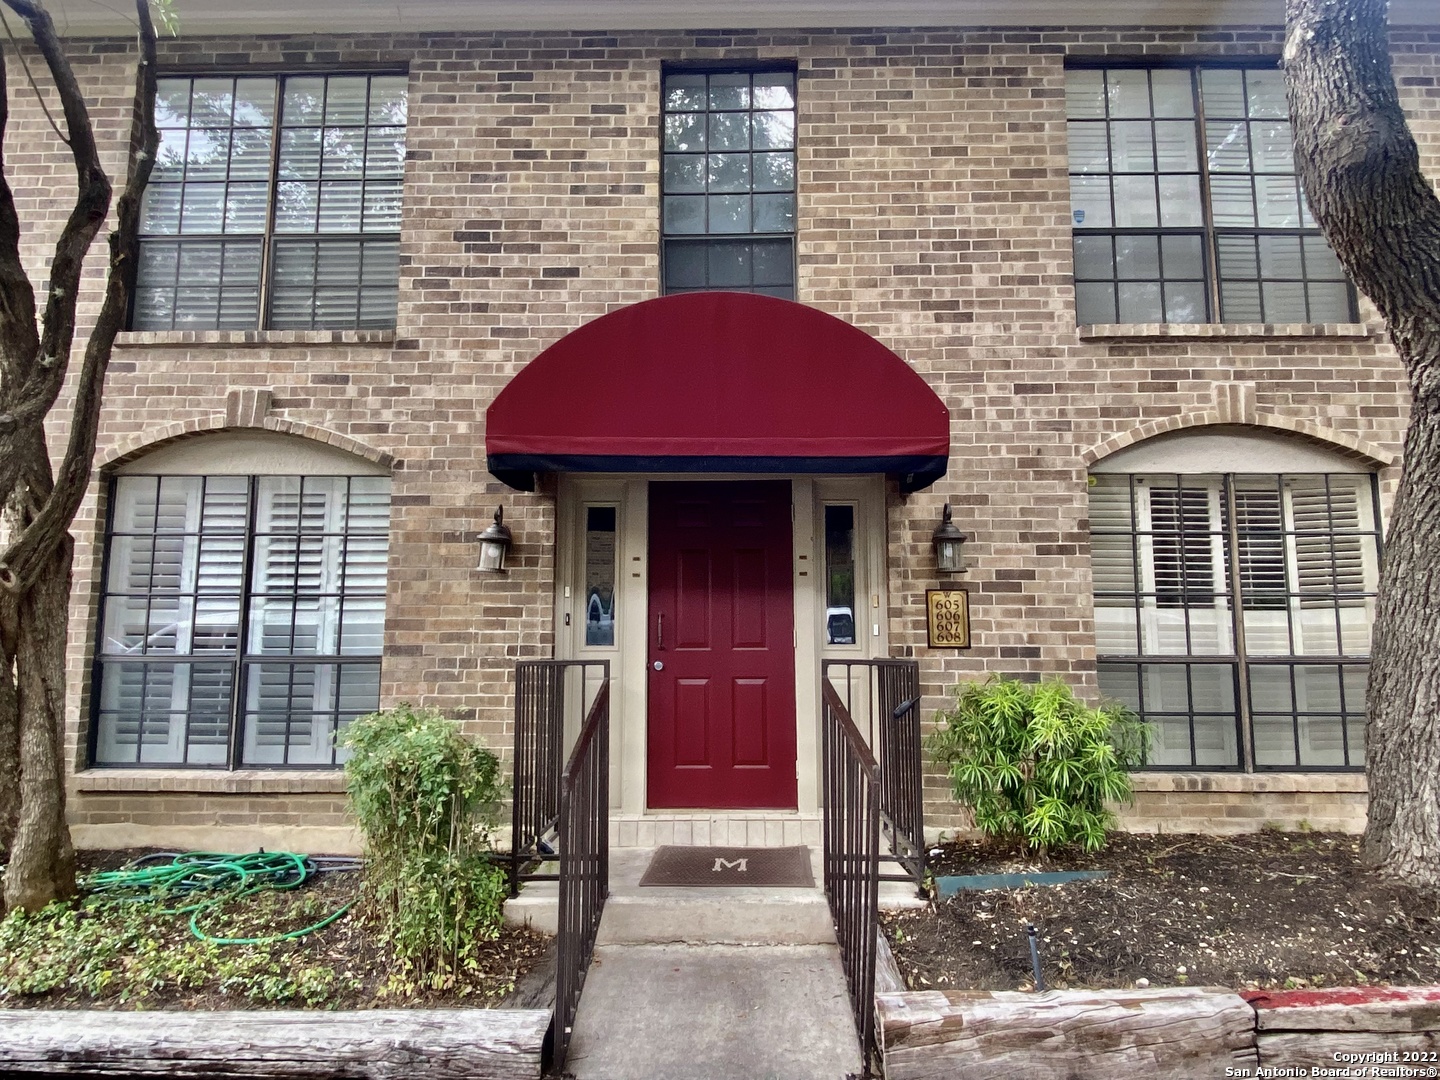 This beautiful condo is in the HIGHLY area of Alamo Heights and AHISD. This home is well kept and clean. Laminate wood flooring throughout and tile in the wet areas. Enjoy the last of the summer in the refreshing community pool. Near shopping, The Quarry Market, North Star Mall, the San Antonio Airport, dinning, easy access to major roads and highways, and so much more!   Schedule your showing today because this home will not last long.